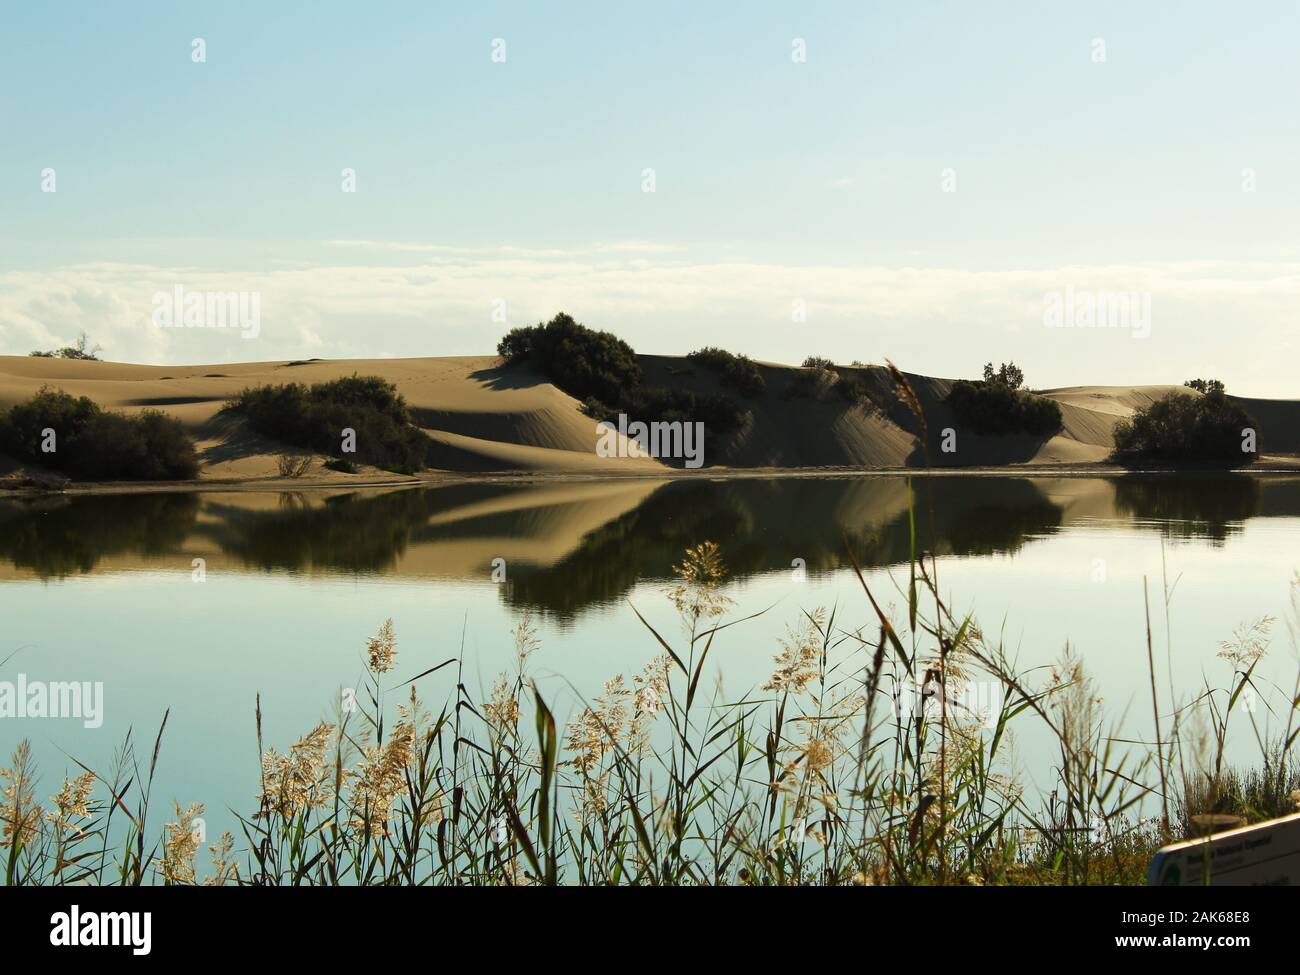 The large sand dunes that form part of a nature reserve, reflecting on a lake in Maspalomas, Gran Canaria, Las Palmas. Stock Photo